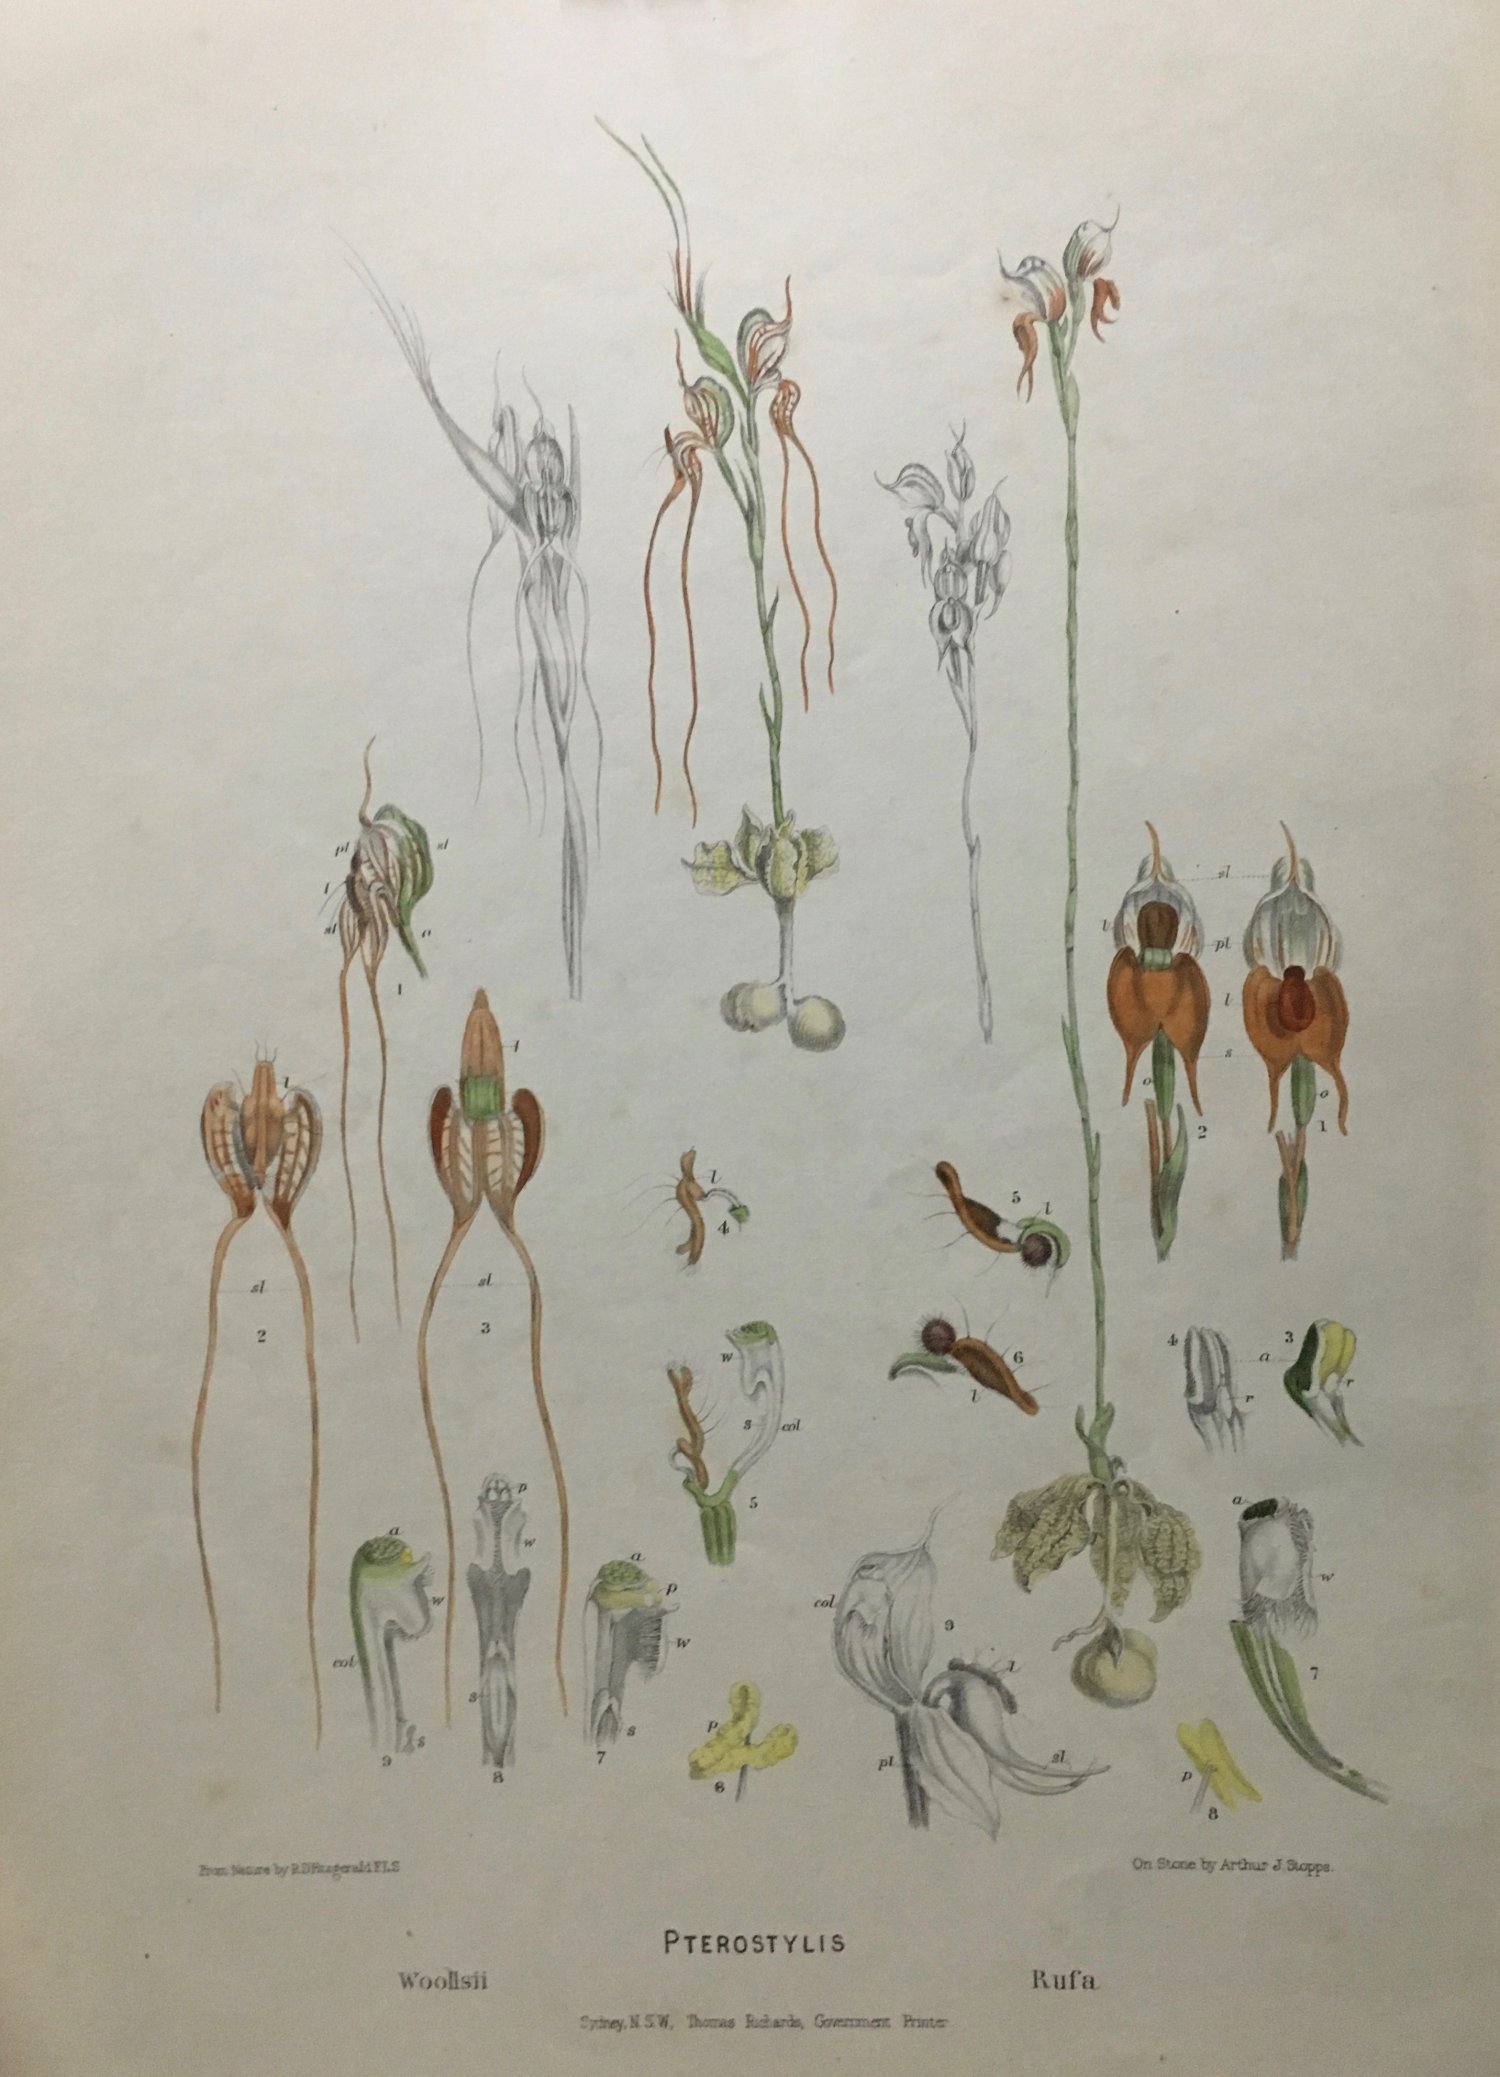 Hand coloured lithographic print from ORCHIDS OF AUSTRALIA, Fitzgerald, R.D. 